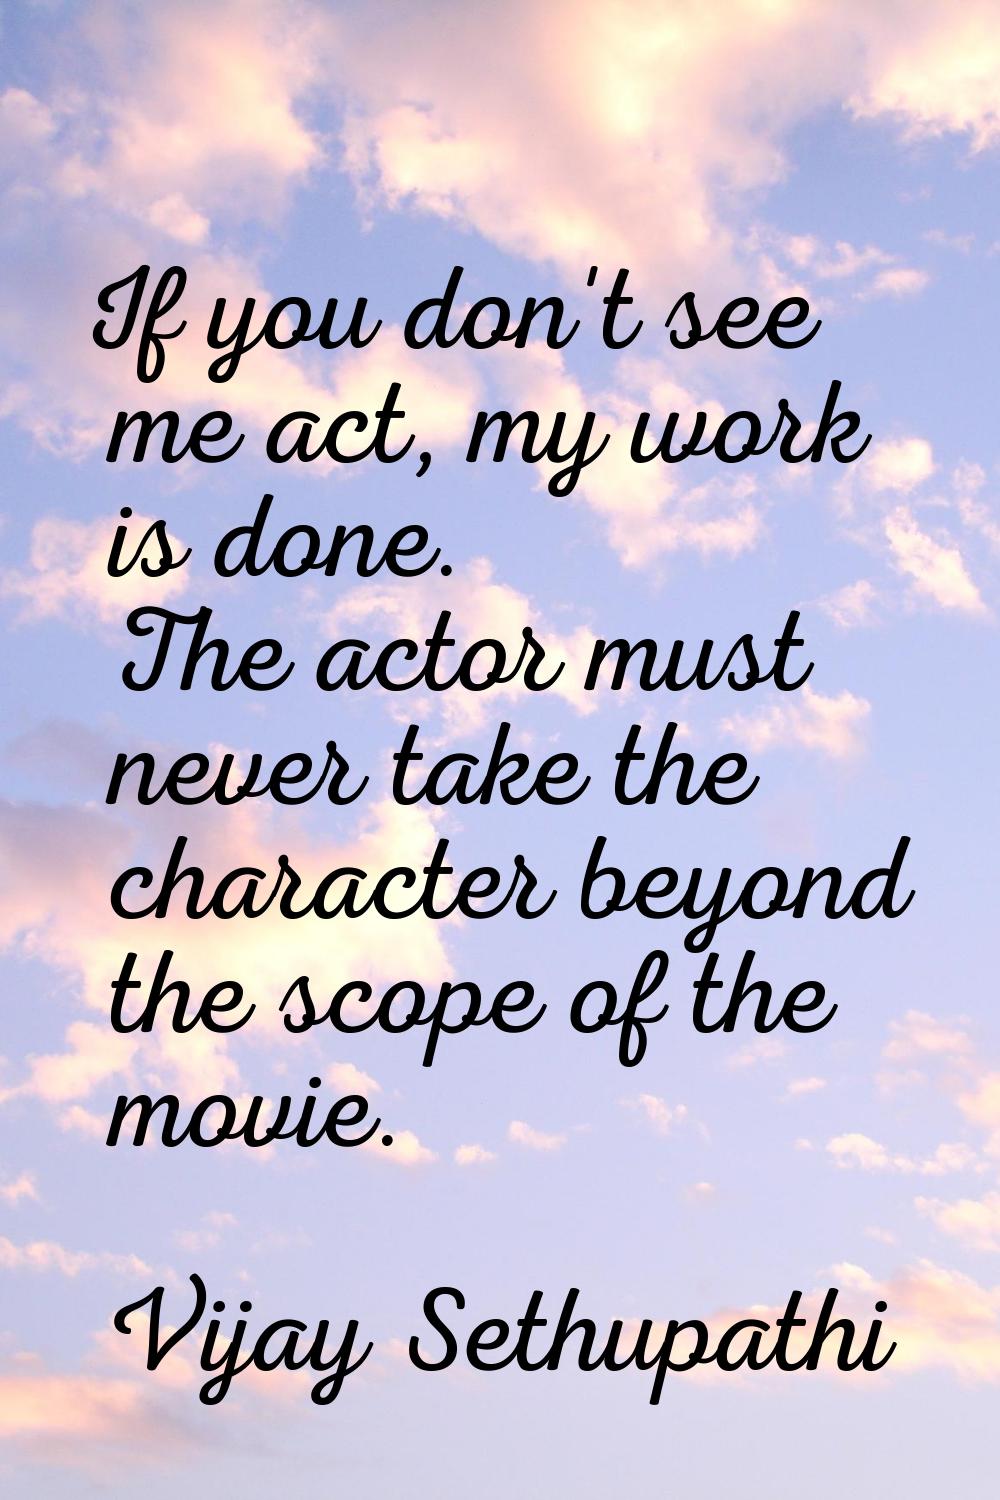 If you don't see me act, my work is done. The actor must never take the character beyond the scope 